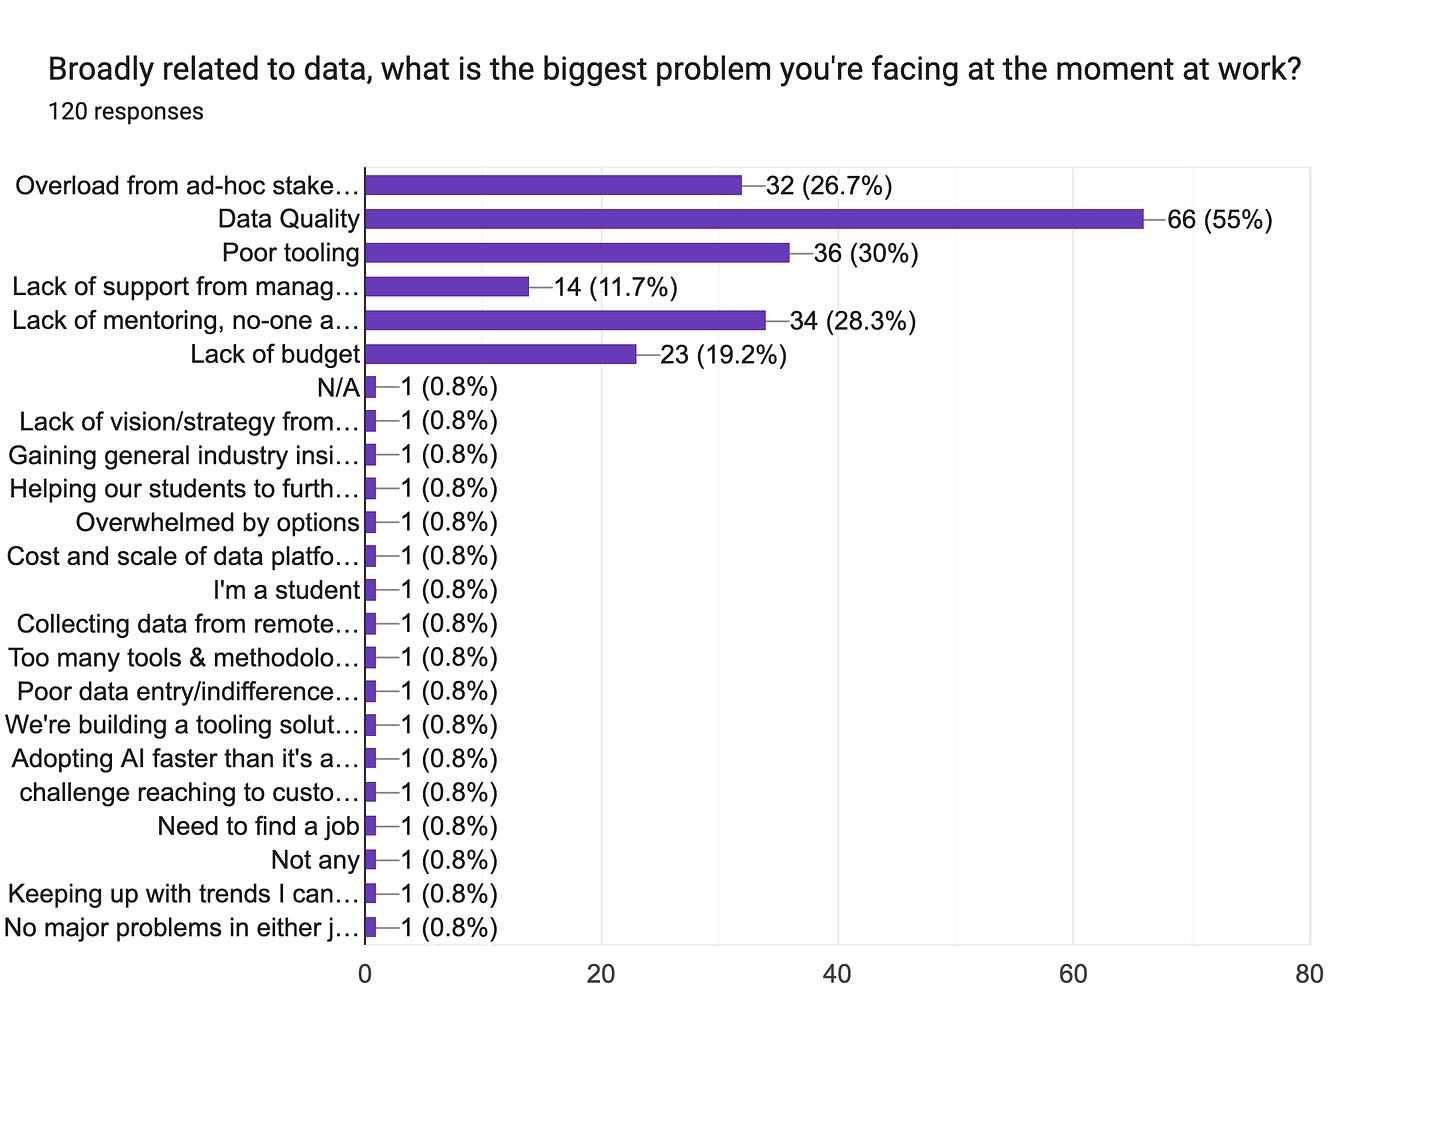 Forms response chart. Question title: Broadly related to data, what is the biggest problem you're facing at the moment at work?. Number of responses: 120 responses.